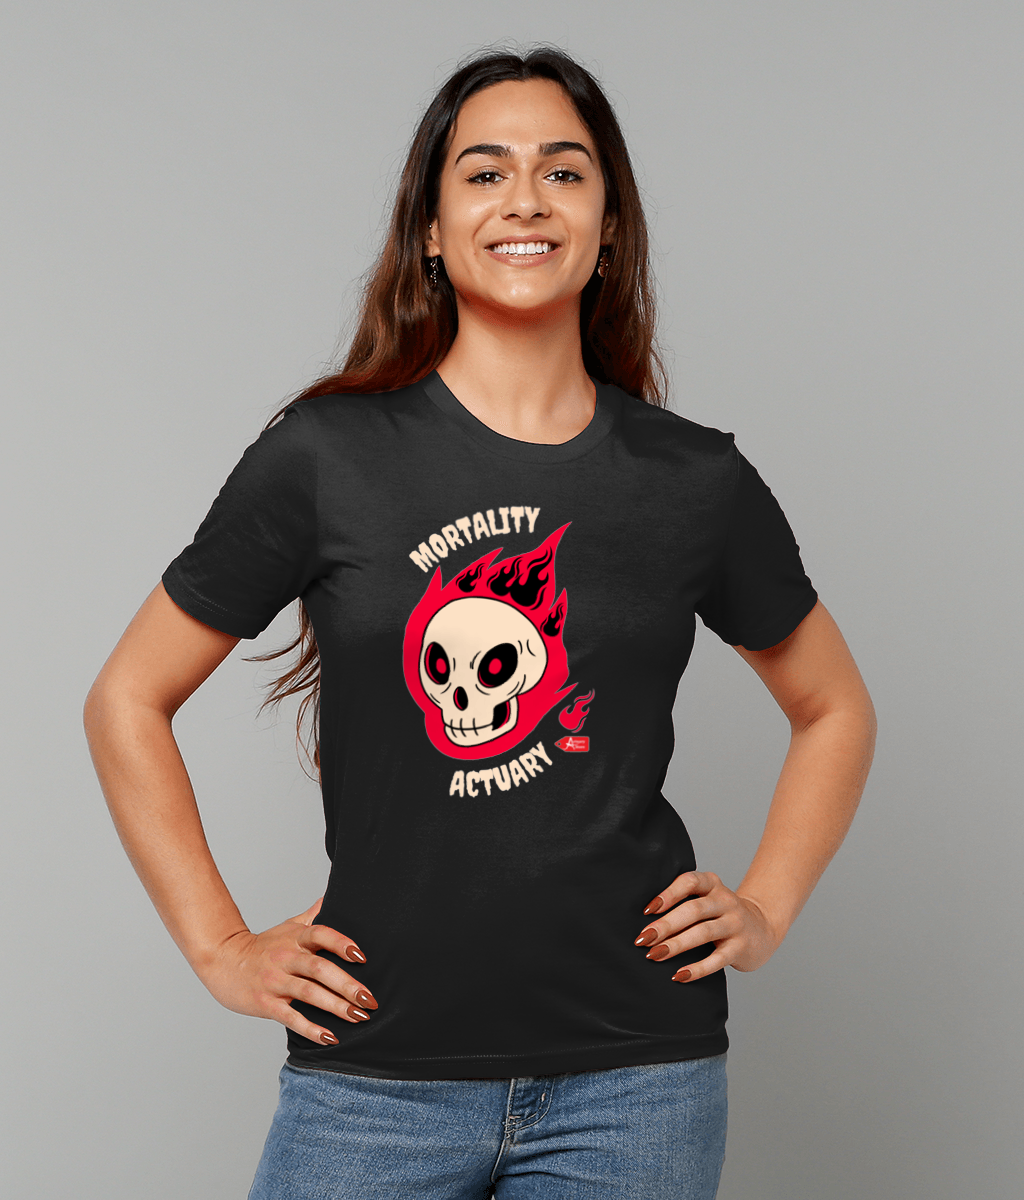 Mortality Actuary Red Flame Black T-Shirt